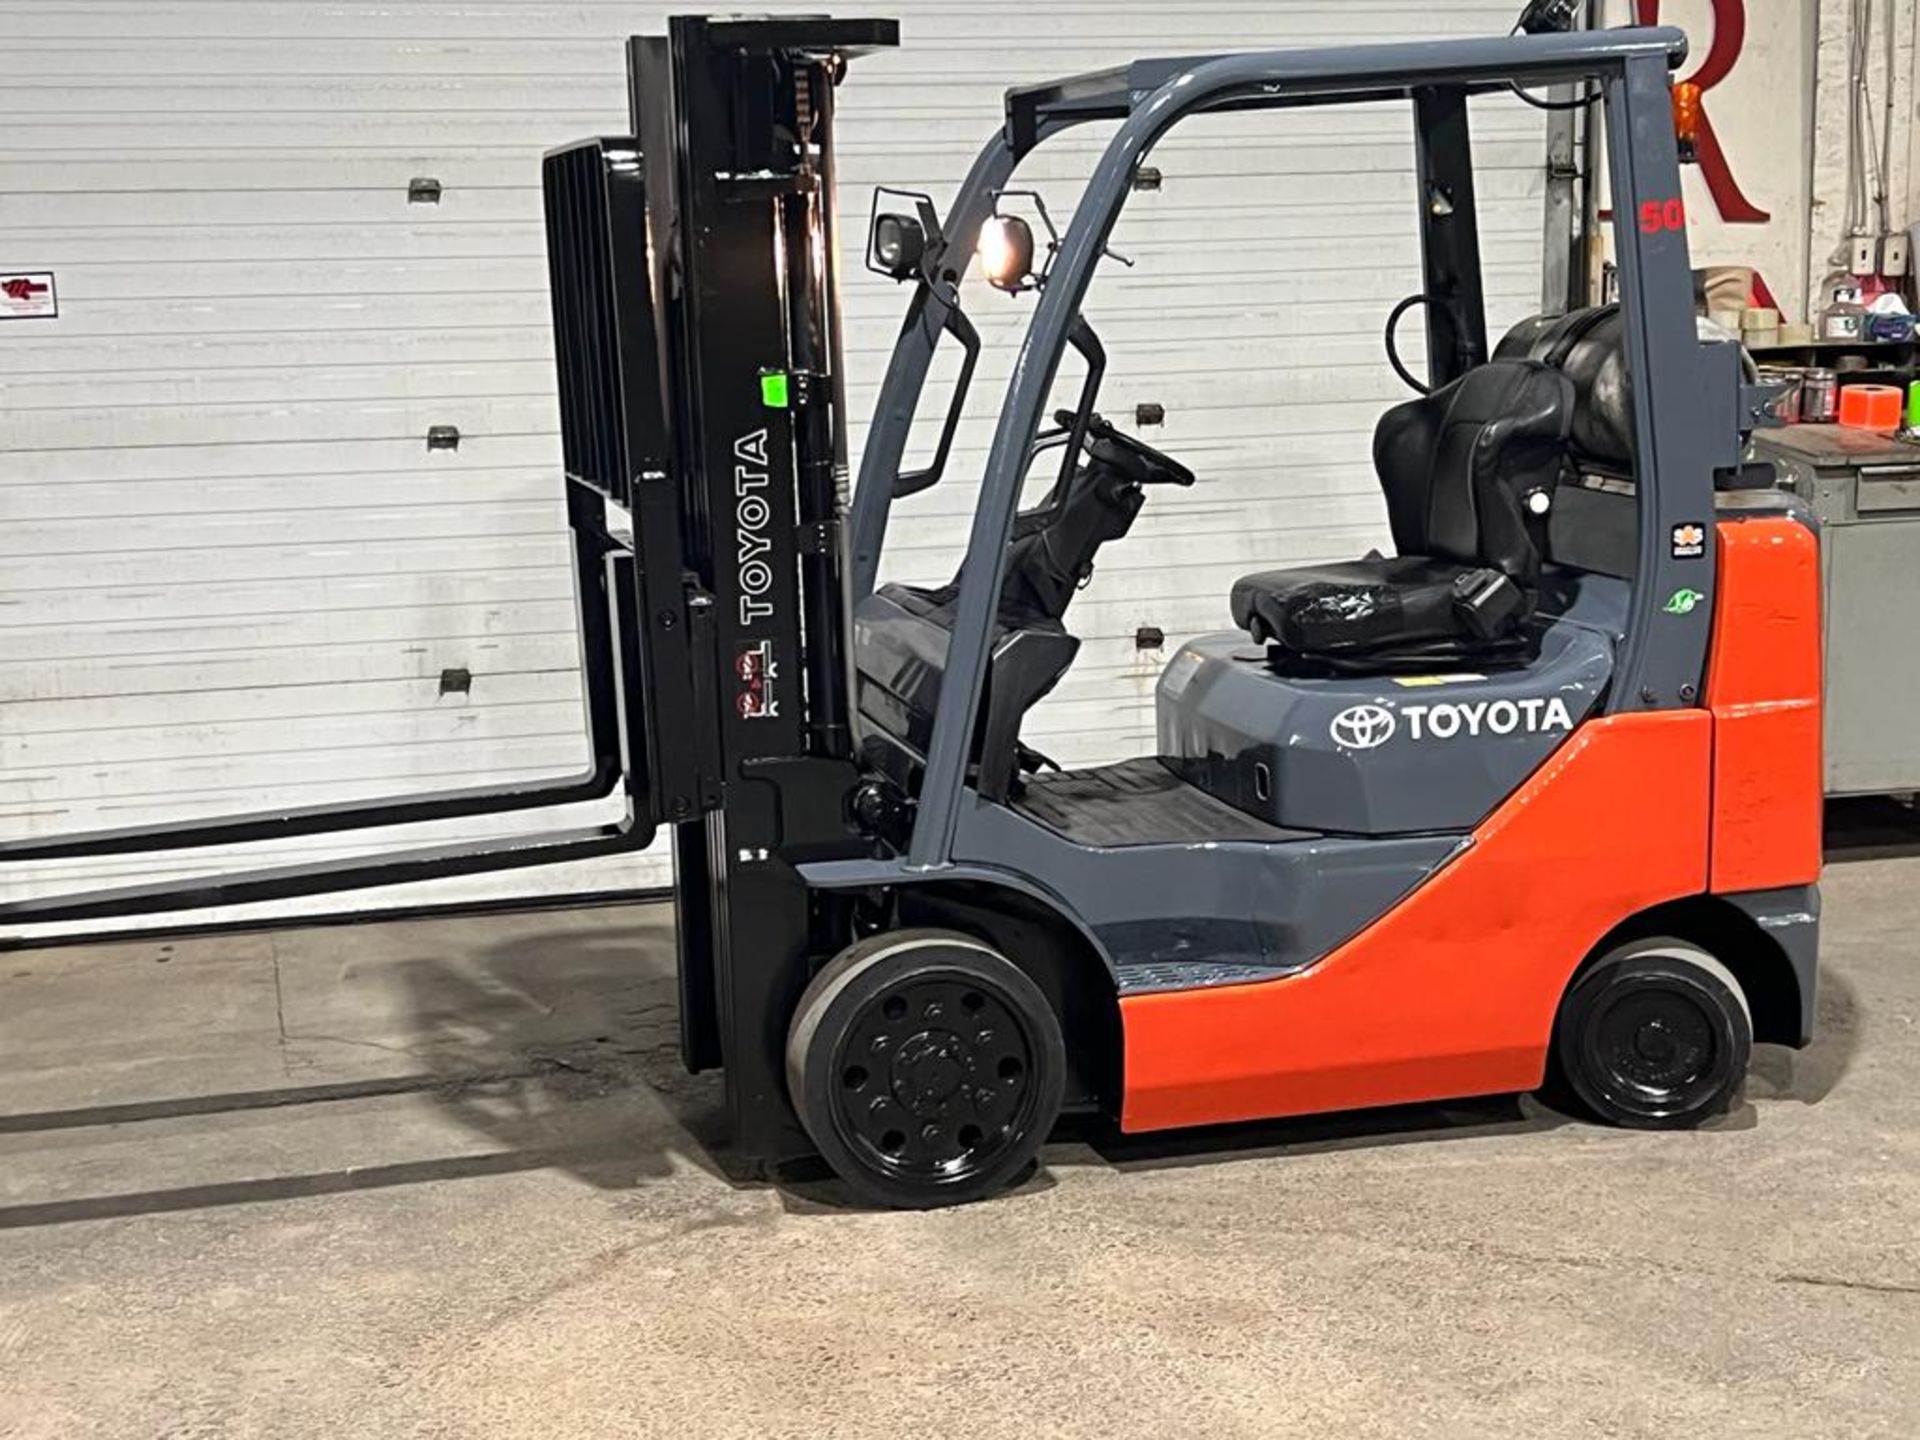 2014 Toyota 5,000lbs Capacity Forklift LPG (propane) with sideshift and 3-STAGE MAST (no propane